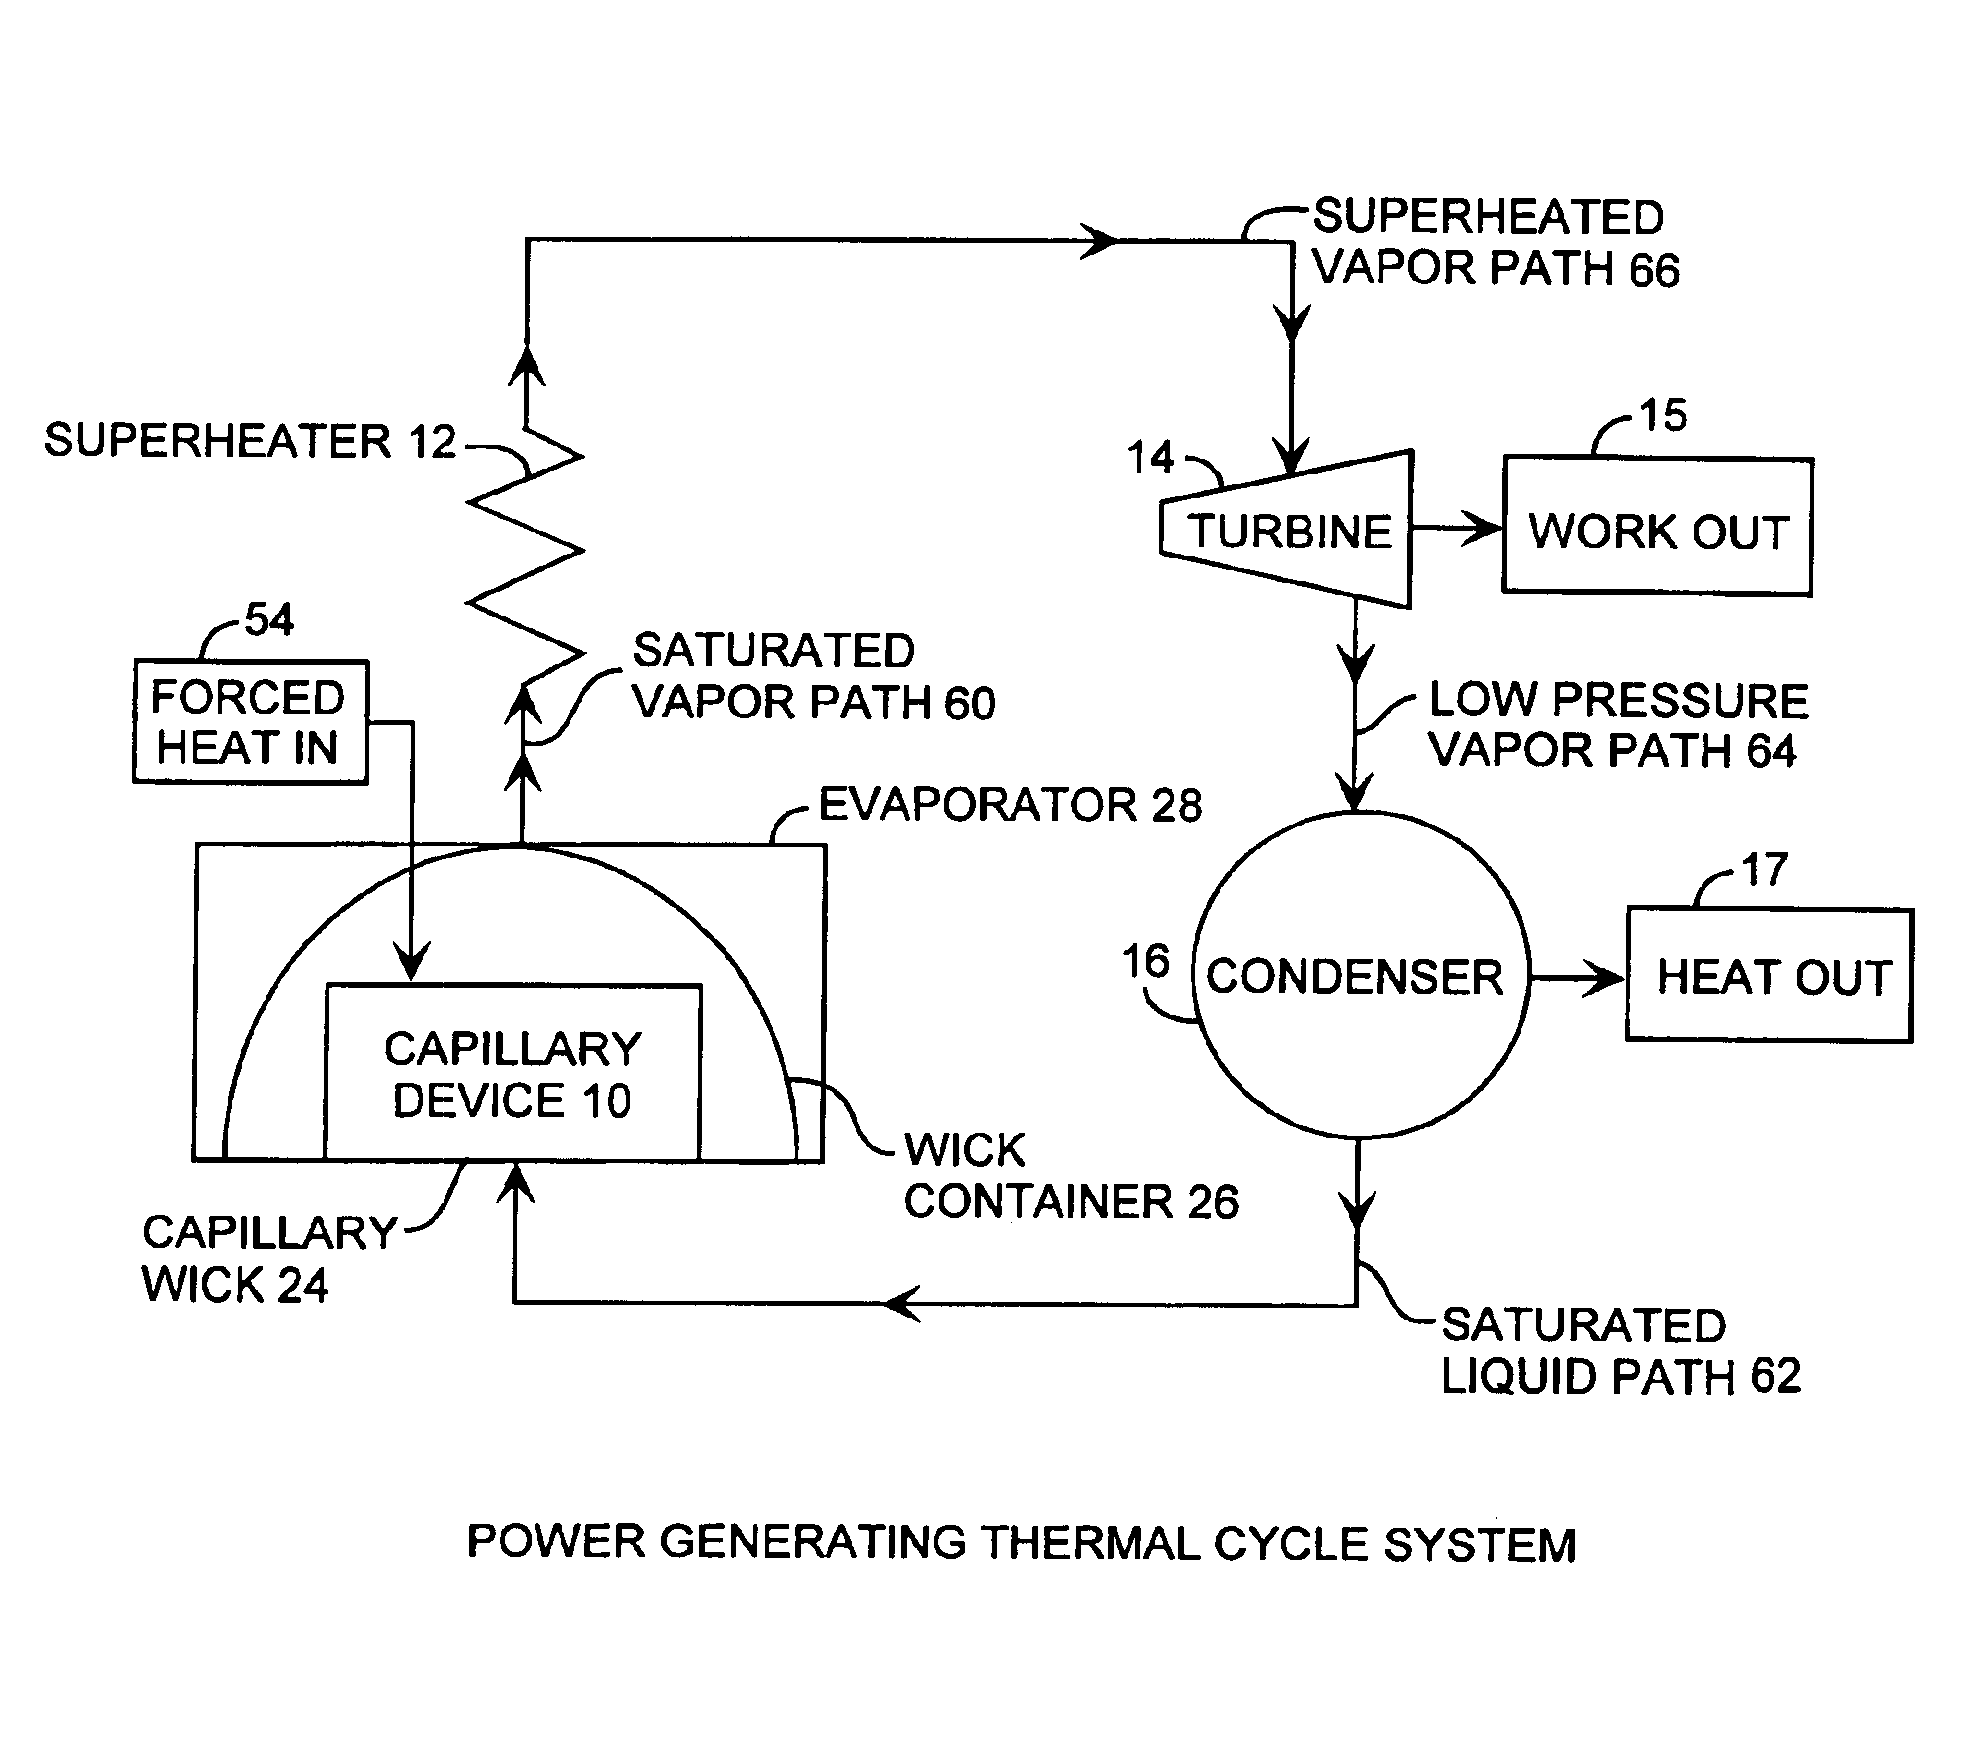 Capillary two-phase thermodynamic power conversion cycle system